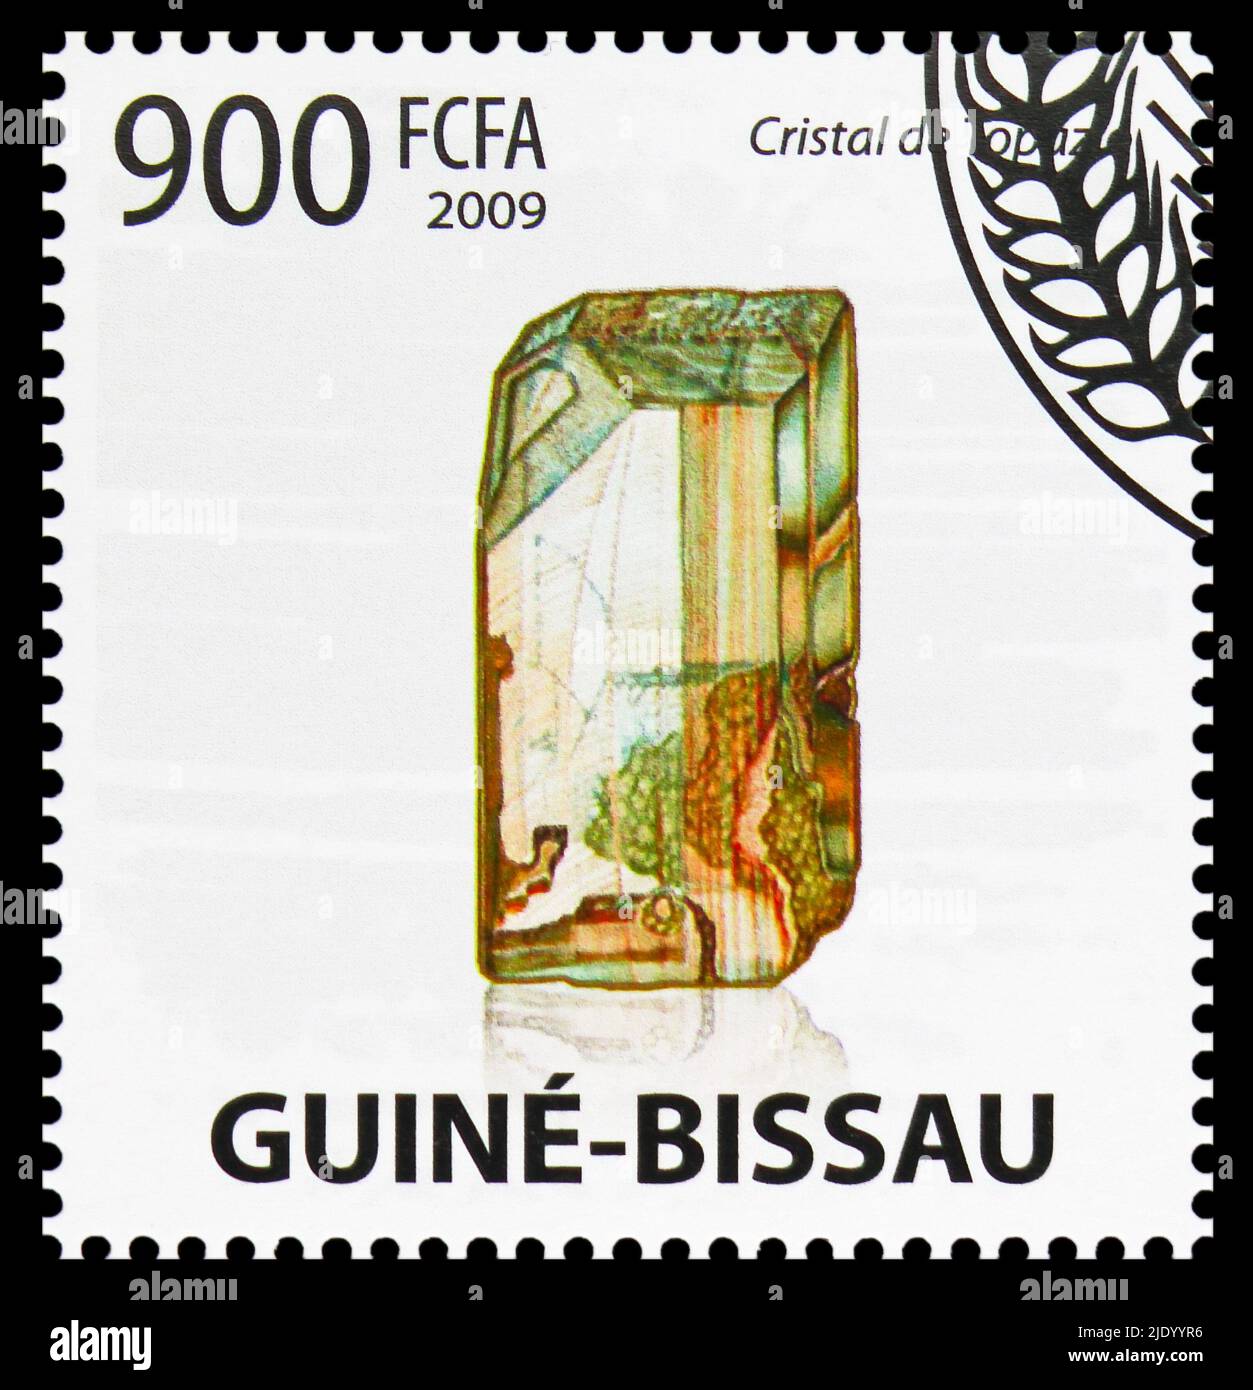 MOSCOW, RUSSIA - JUNE 17, 2022: Postage stamp printed in Guinea-Bissau shows Crystal of Topaz, Minerals serie, circa 2009 Stock Photo